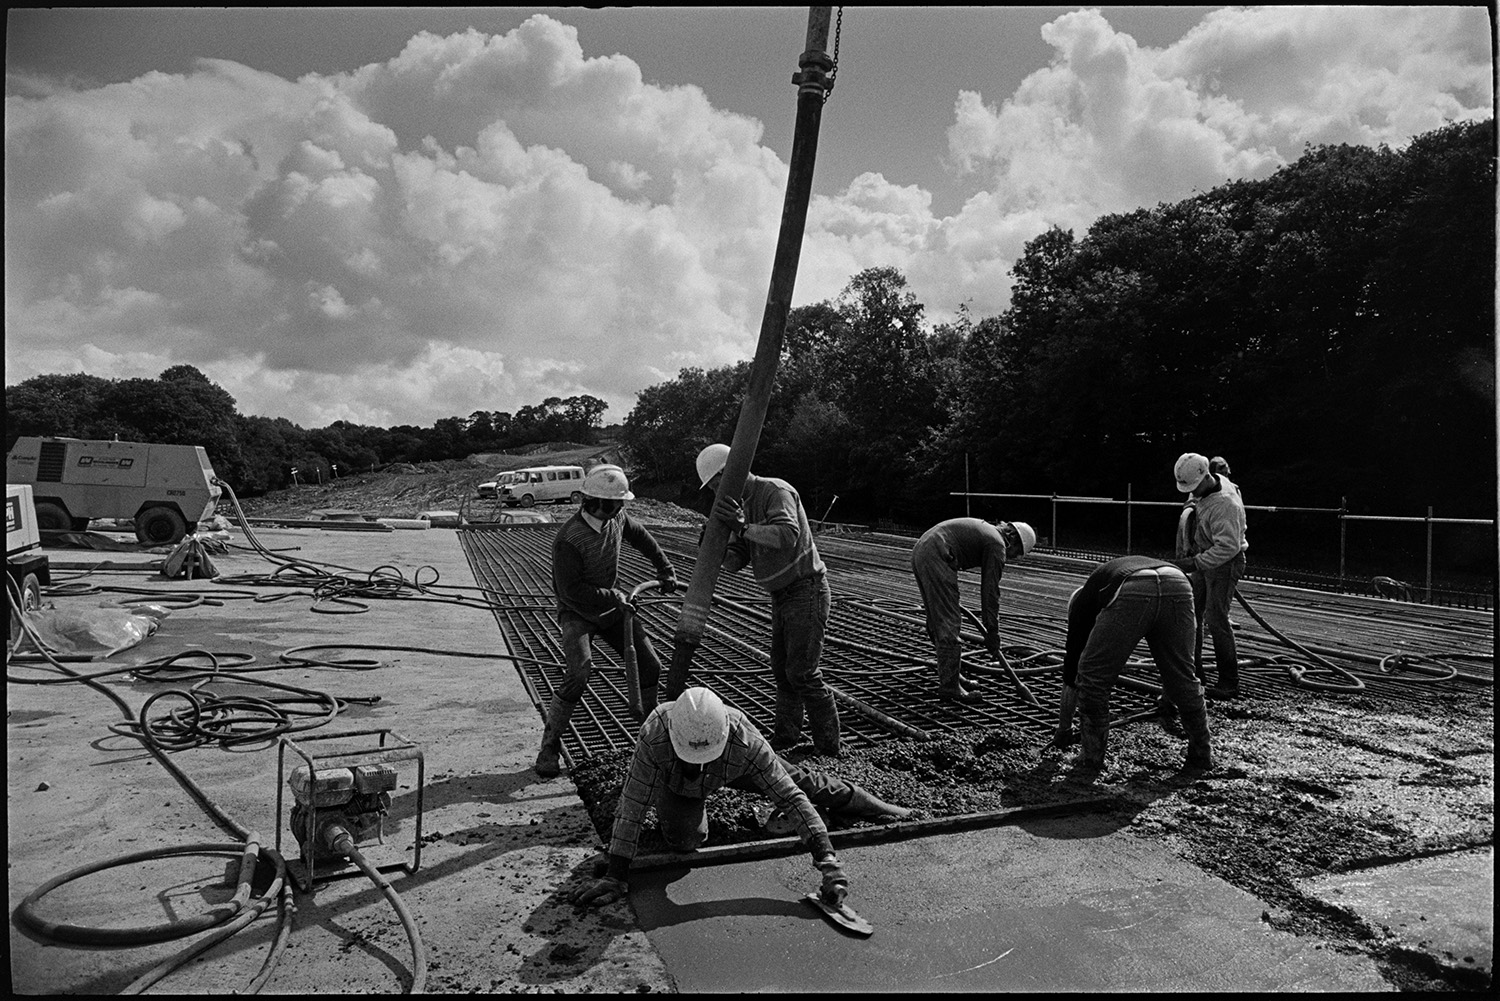 Men building new link road laying cement delivered by crane, sun and cloud. 
[Men laying cement over metal mesh on the Devon Link Road or A361. The cement is being delivered by a crane. A man is the foreground is levelling the cement with a wooden baton.]